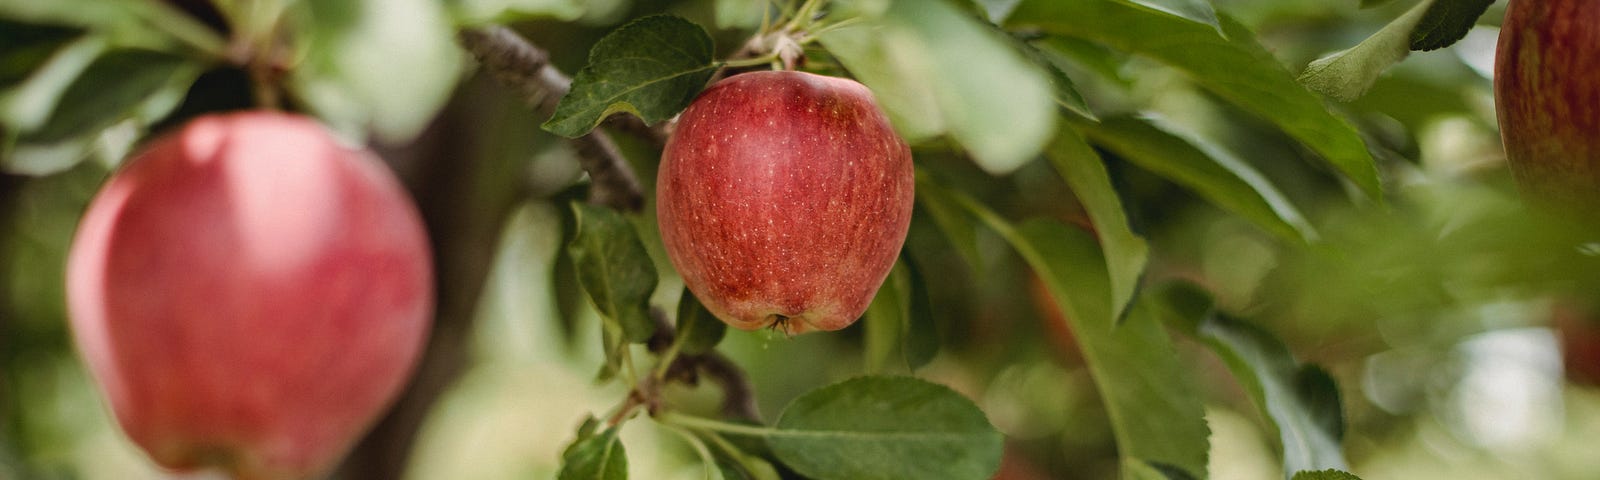 Close up of red apples on an apple tree.